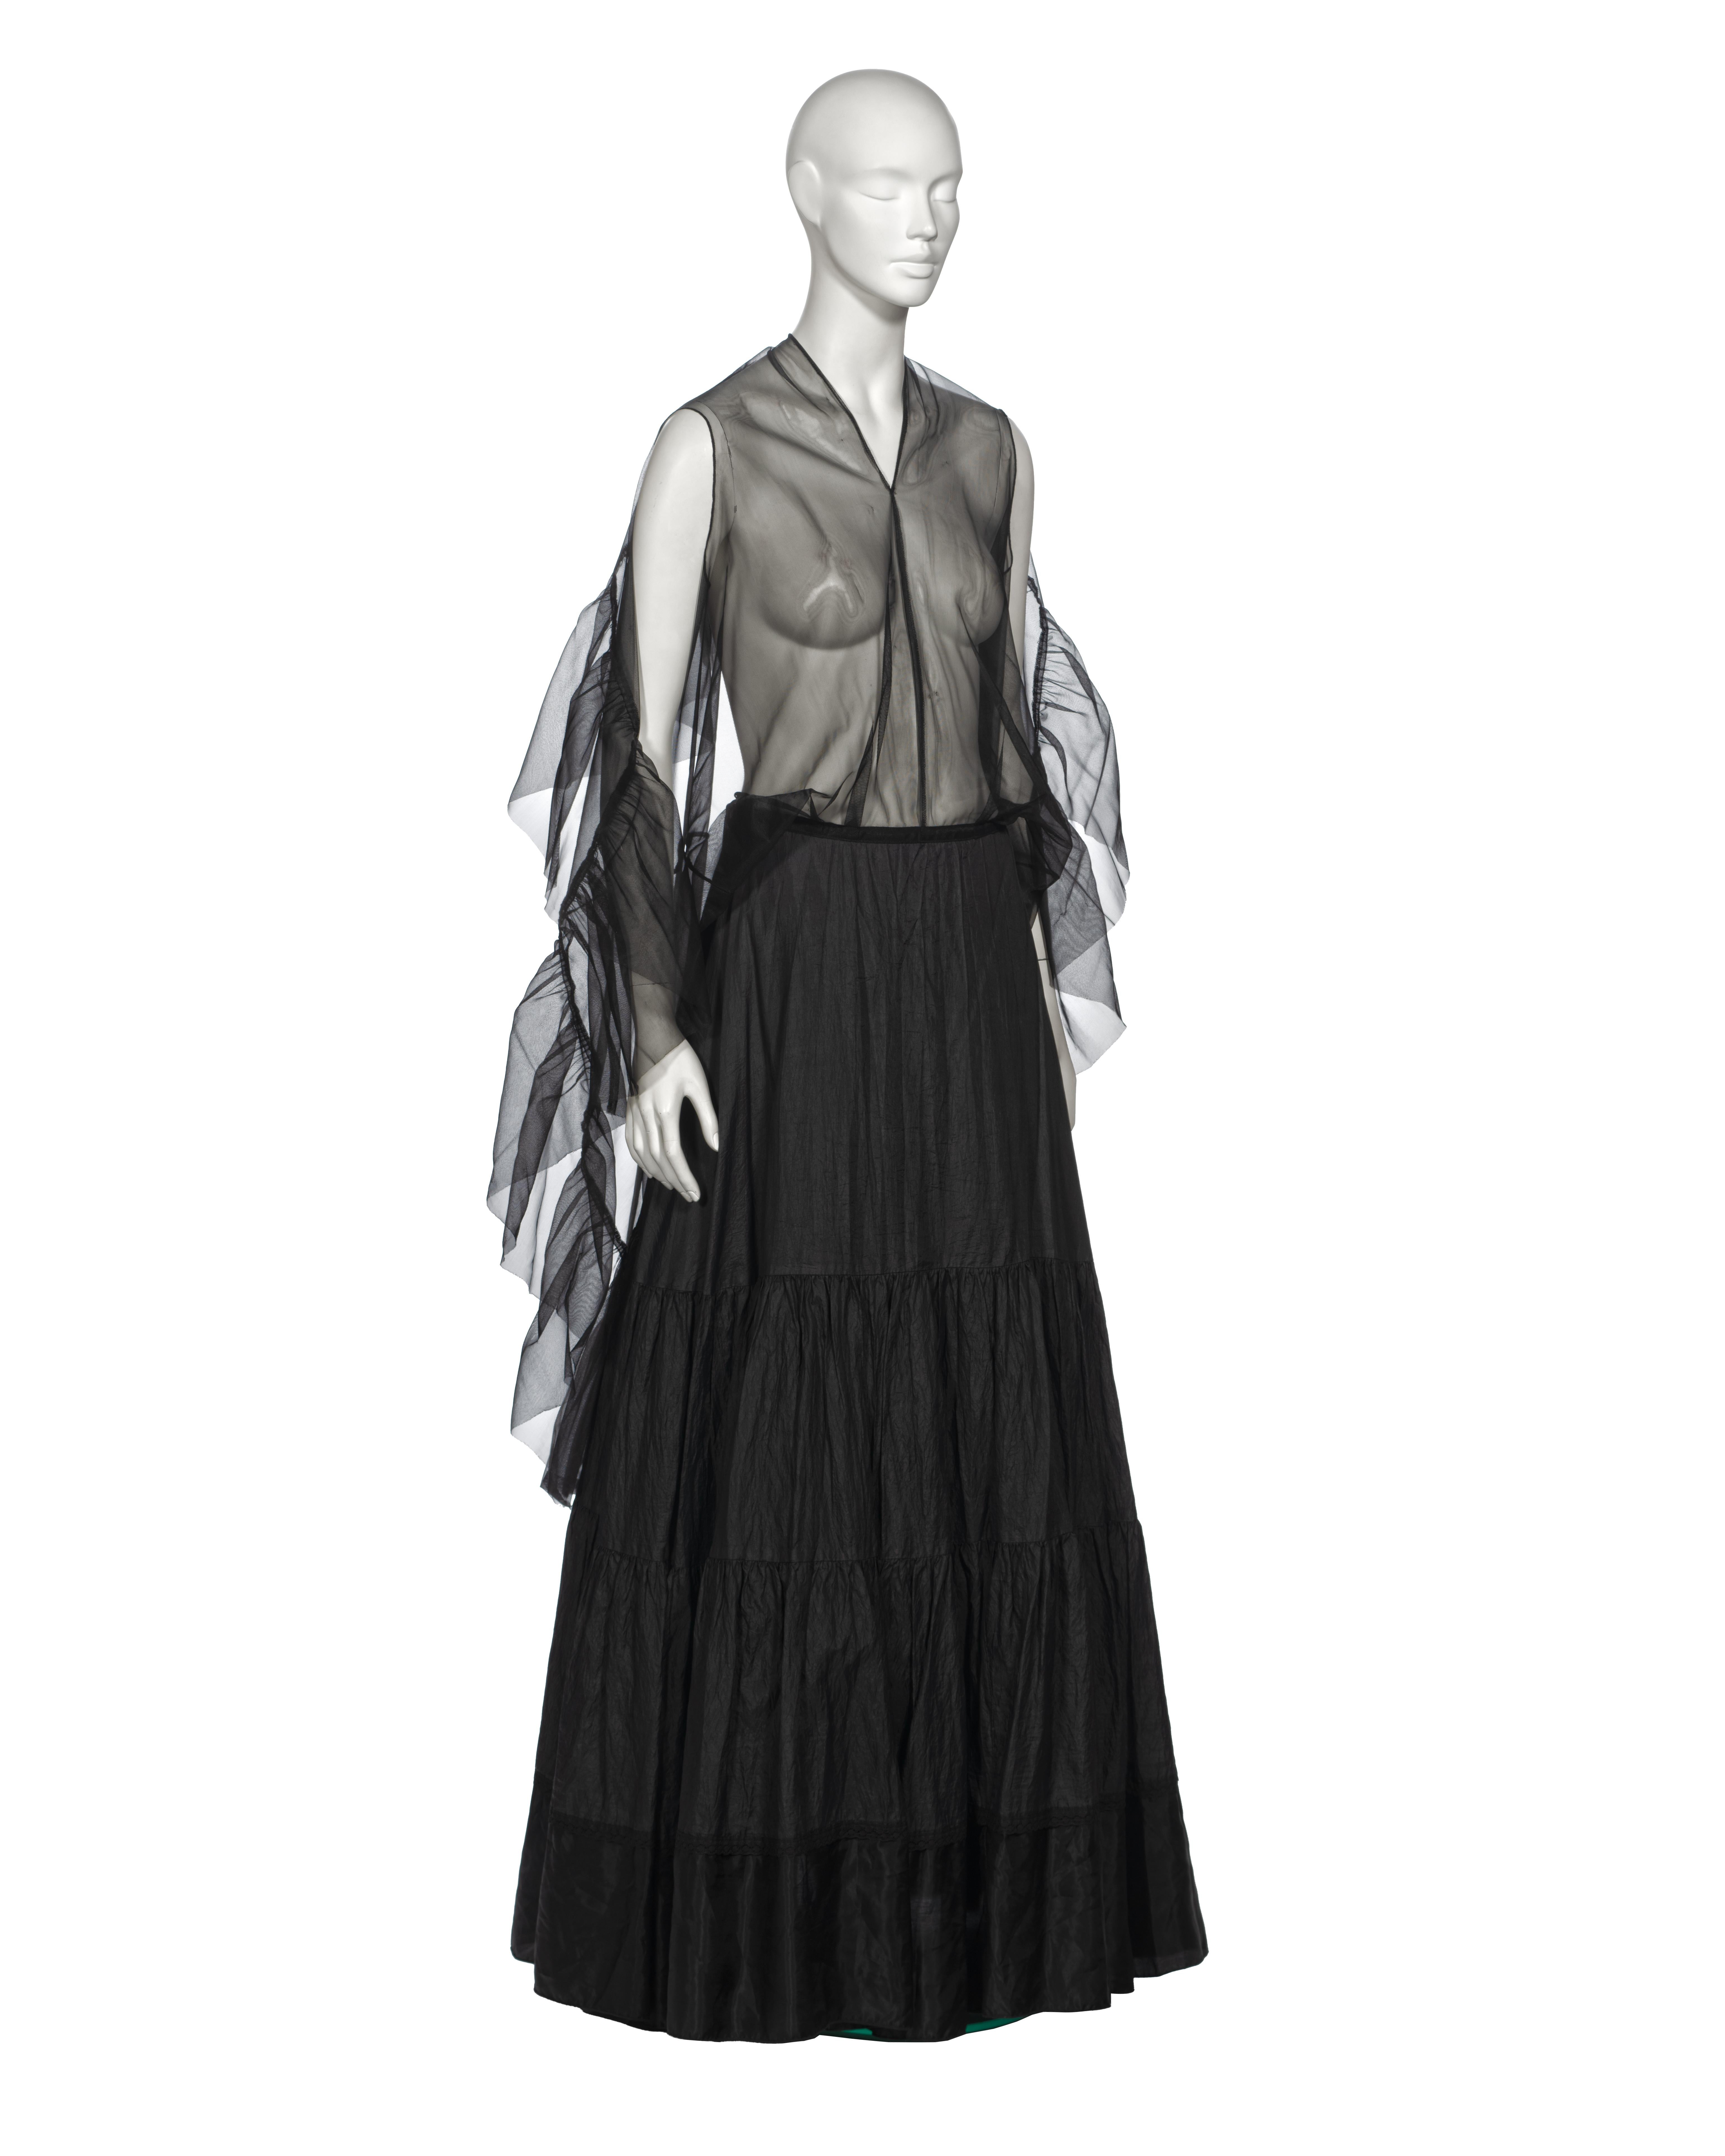 Martin Margiela Artisanal Evening Dress Made Out Of Vintage Petticoats, ss 2003 For Sale 3